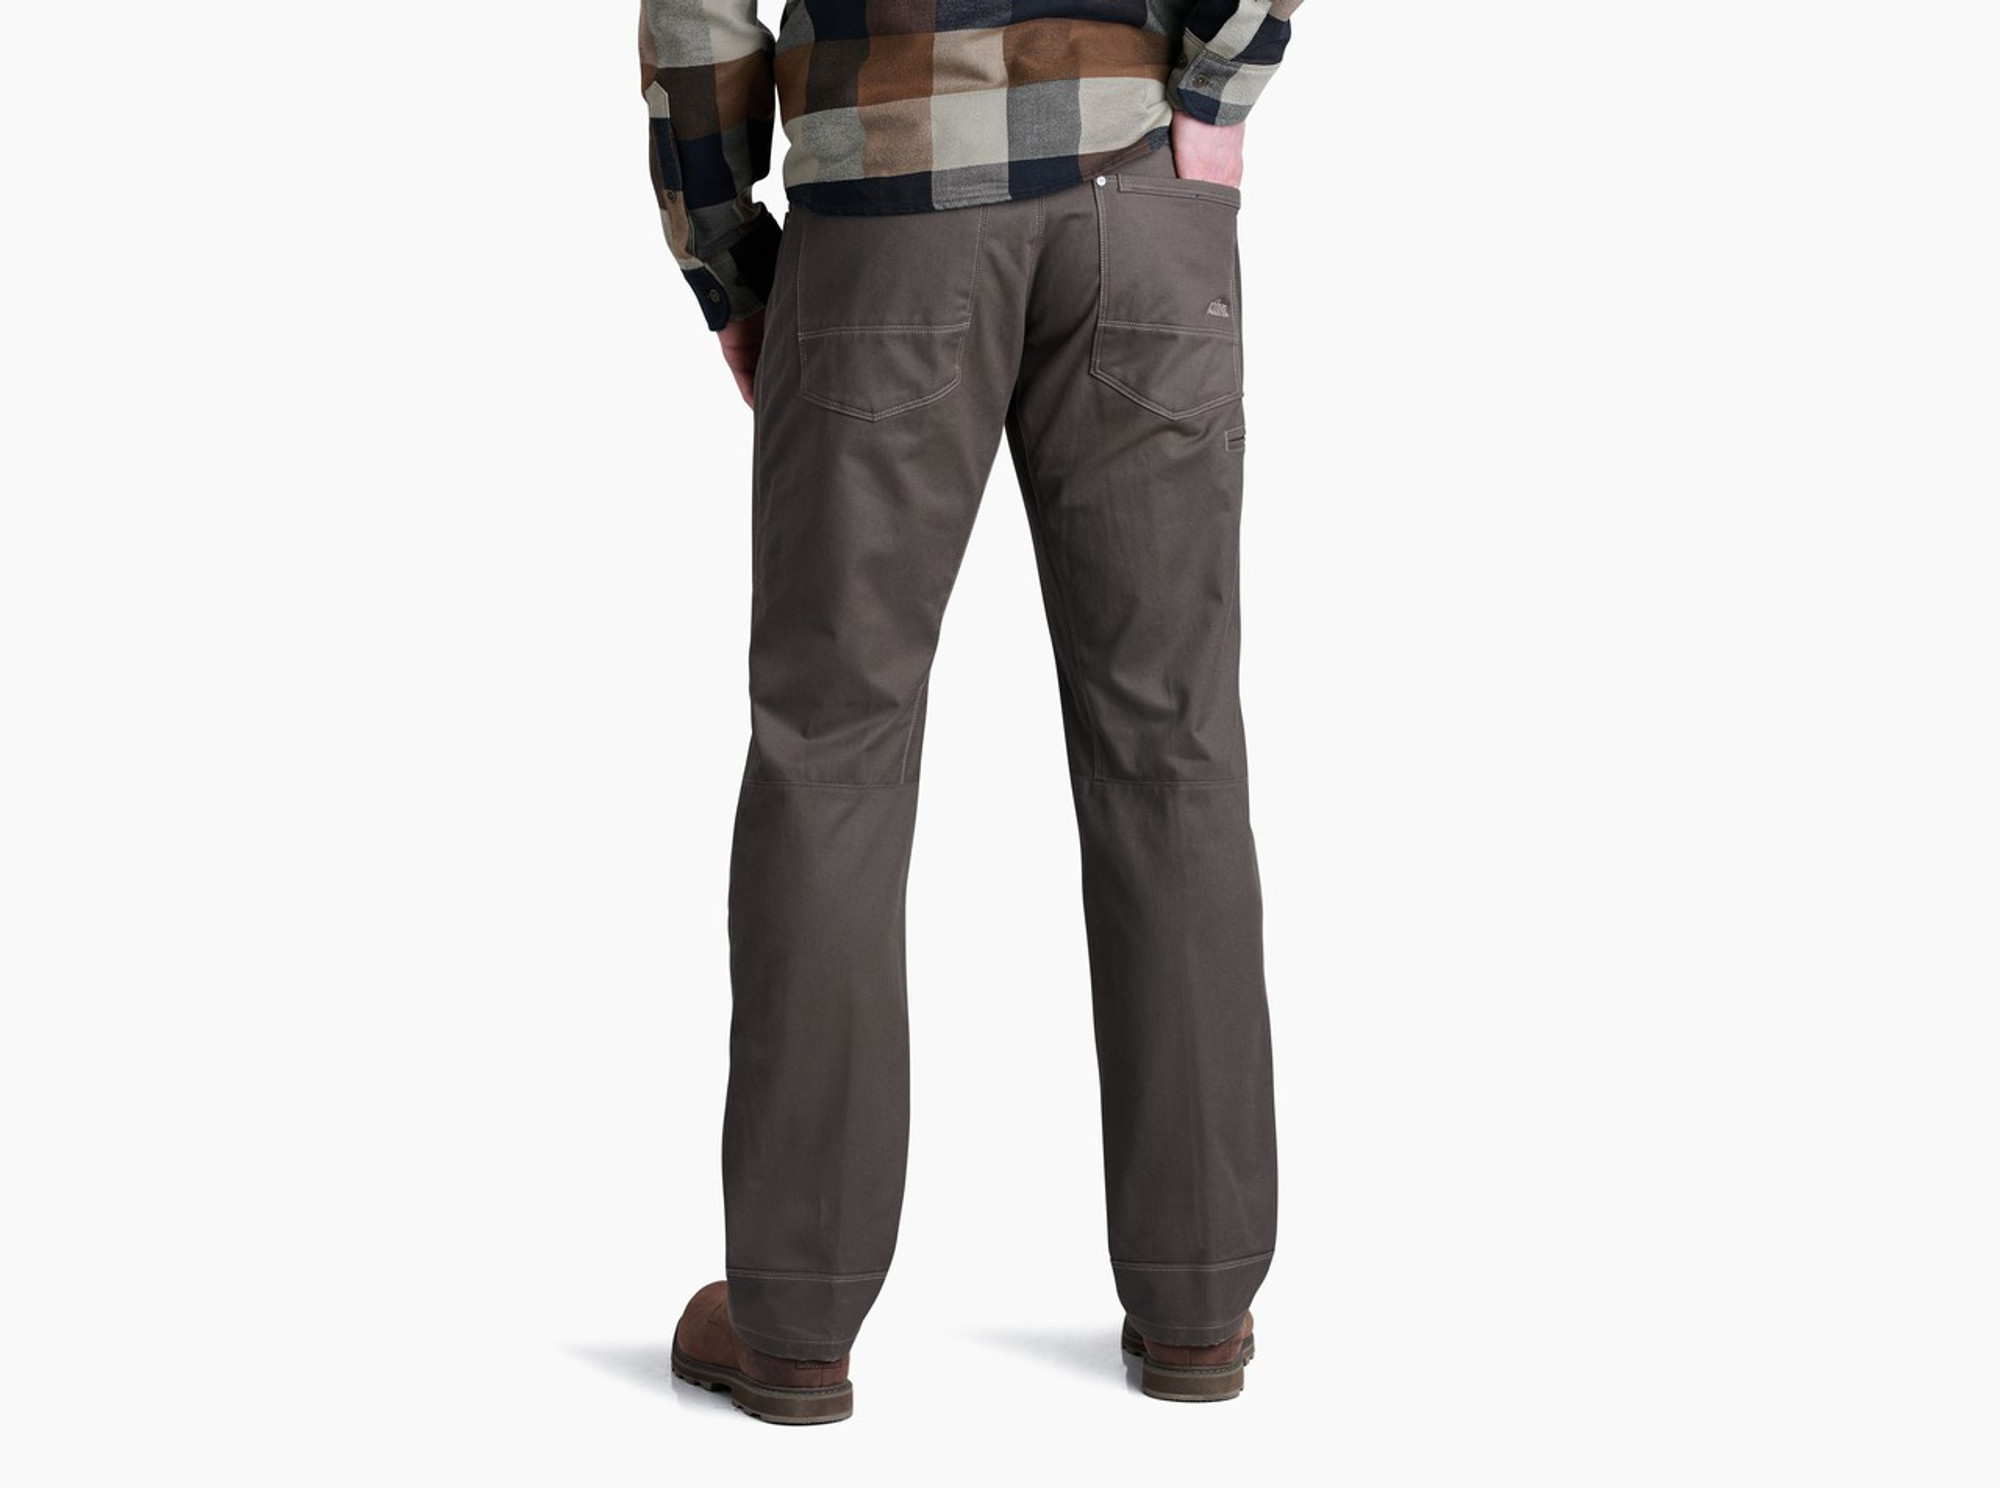 Kuhl Men's Rydr Pant - High Mountain Sports